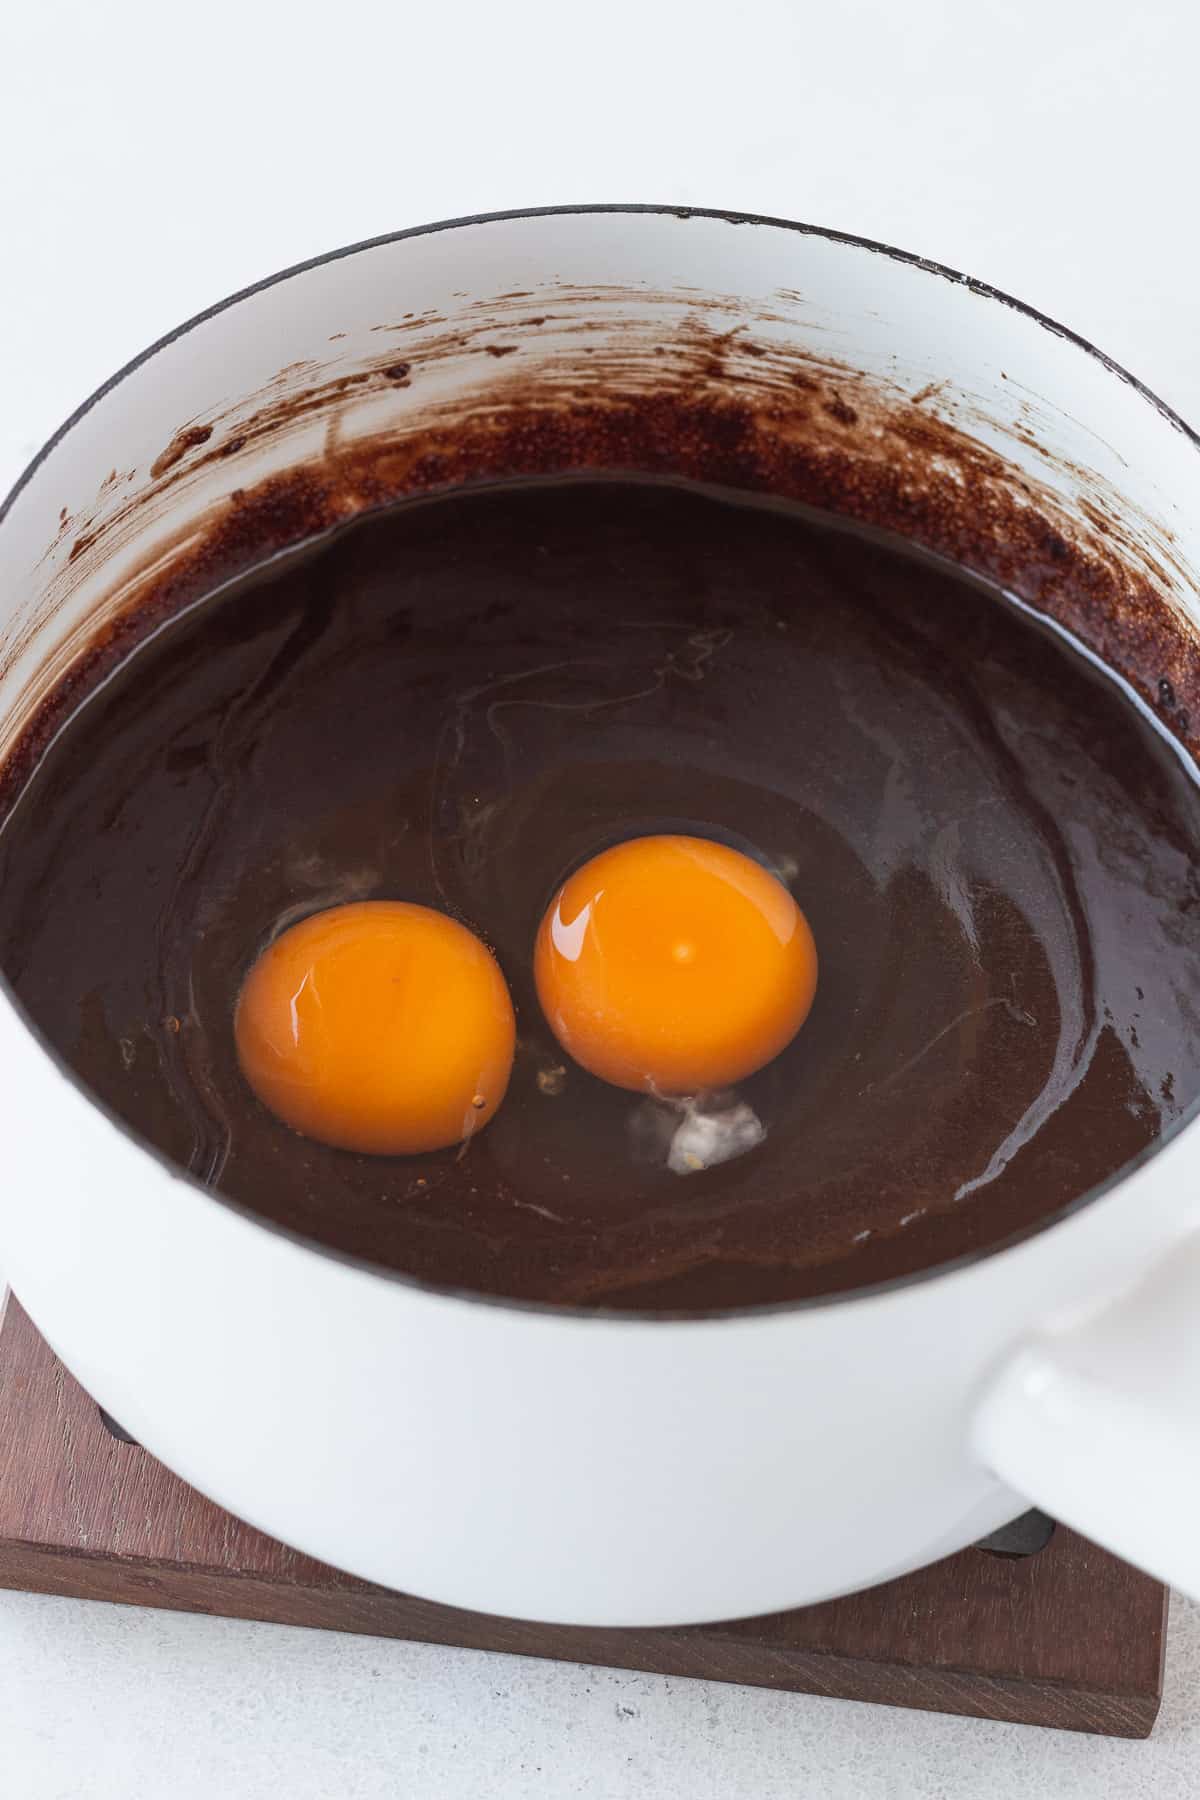 Eggs added to dairy-free brownie batter.